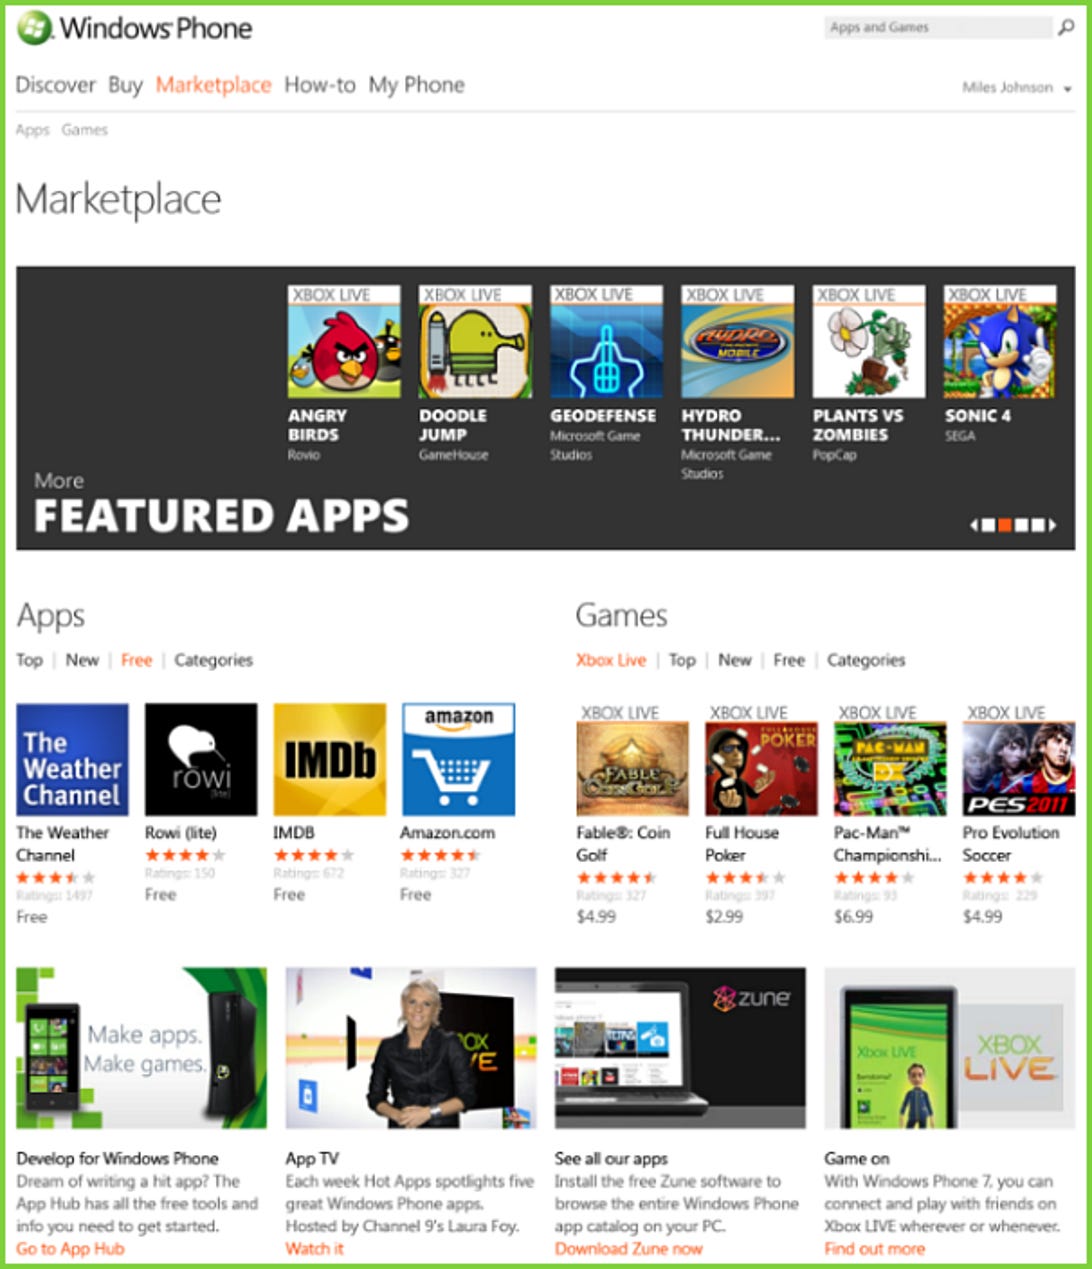 The new Windows Phone 7 online Marketplace